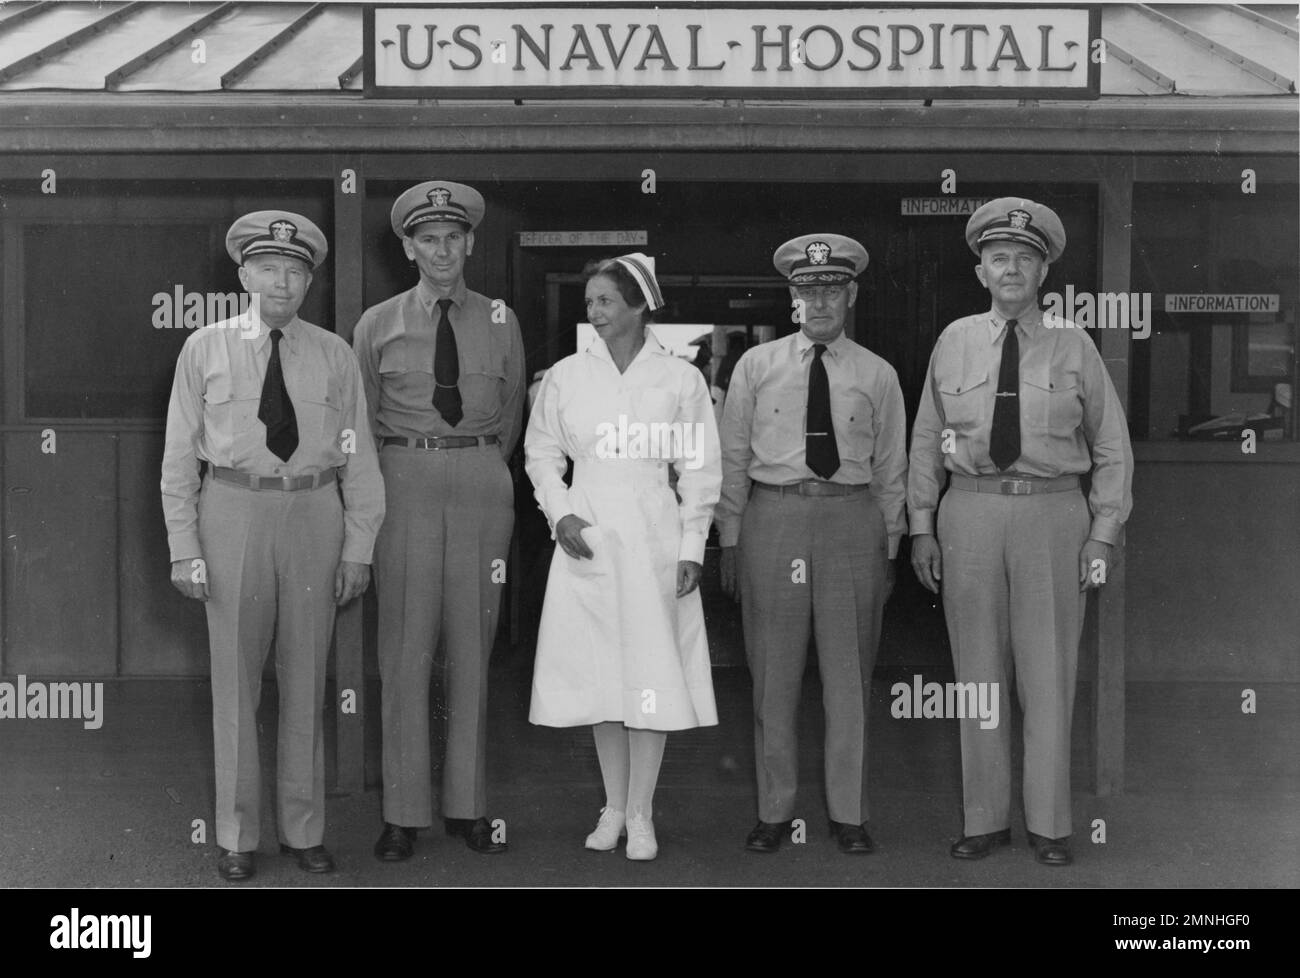 Base 8, U.S. Naval Hospital, Pearl Harbor, Territory of Hawaii. Vice Admiral Ross T. McIntire, Captain L.O. Stone, Lieutenant Commander Susan J. English, Captain W.A. Wylie, Rear Admiral C.B. Camerer,   Pearl Harbor, Hawaii / Territory of Hawaii ca. 1940s or 1950s Stock Photo